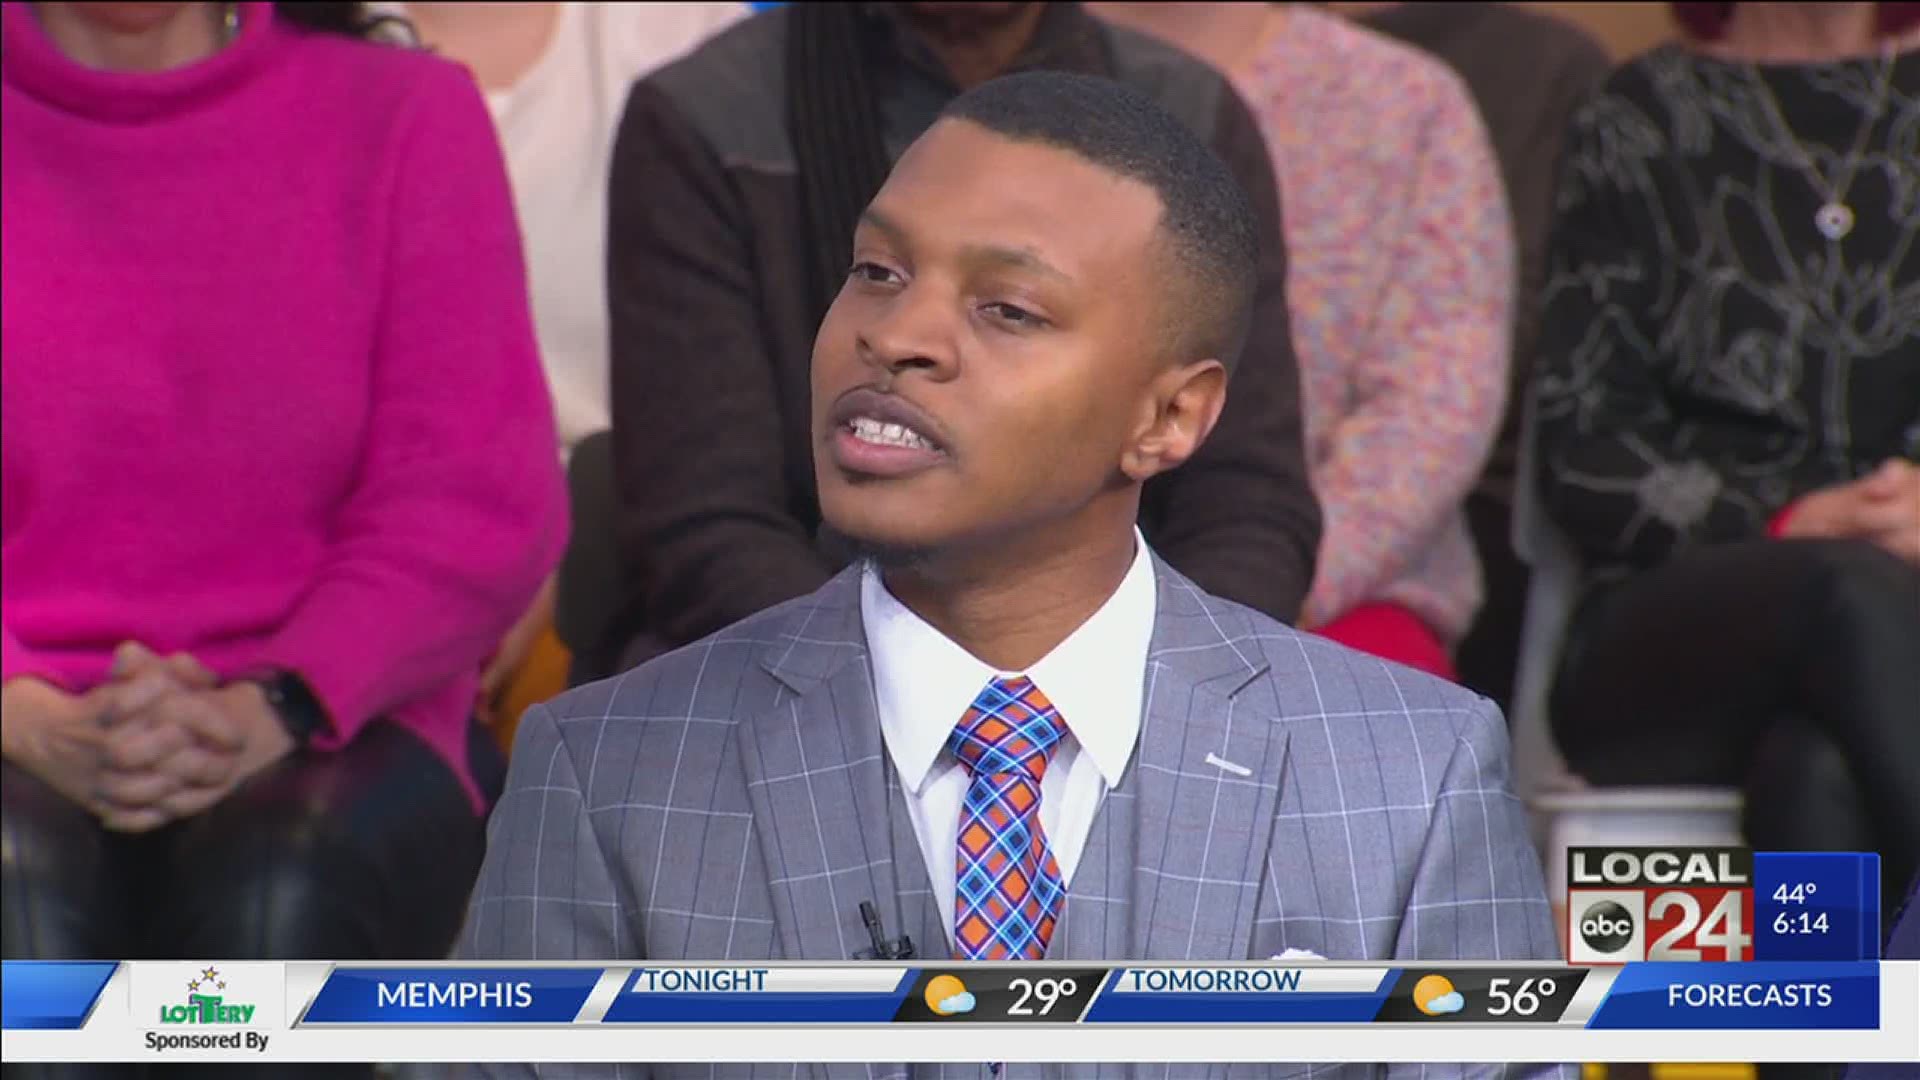 Dacavien Reeves shares his inspirational story on Good Morning America.